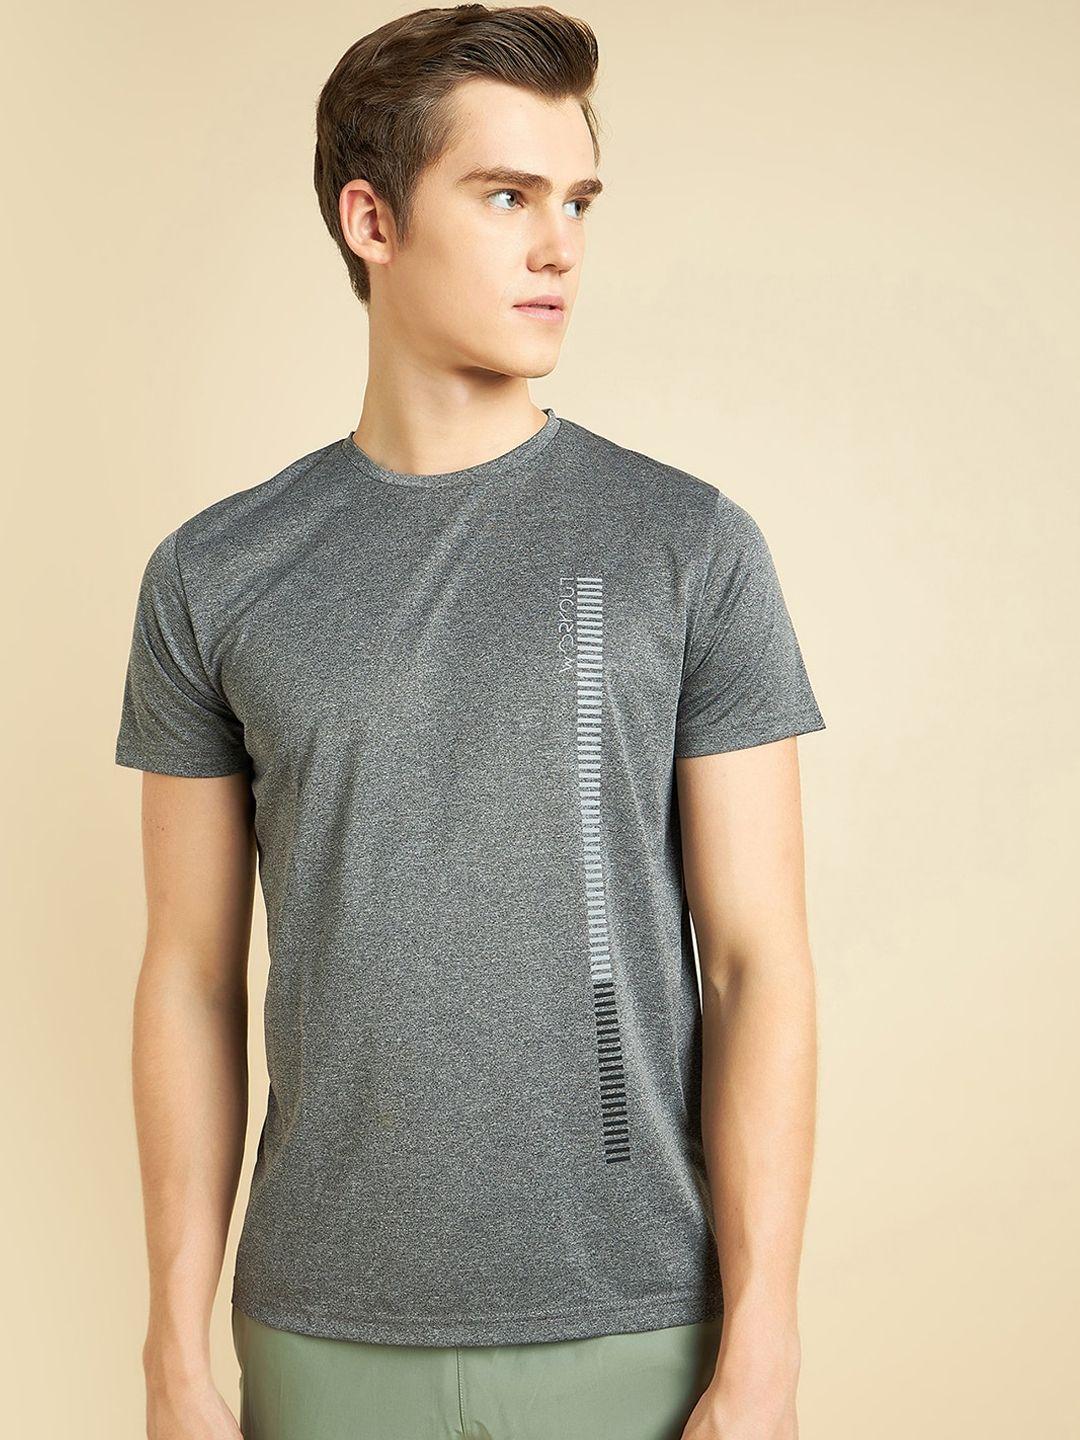 sweet-dreams-charcoal-round-neck-sports-t-shirt